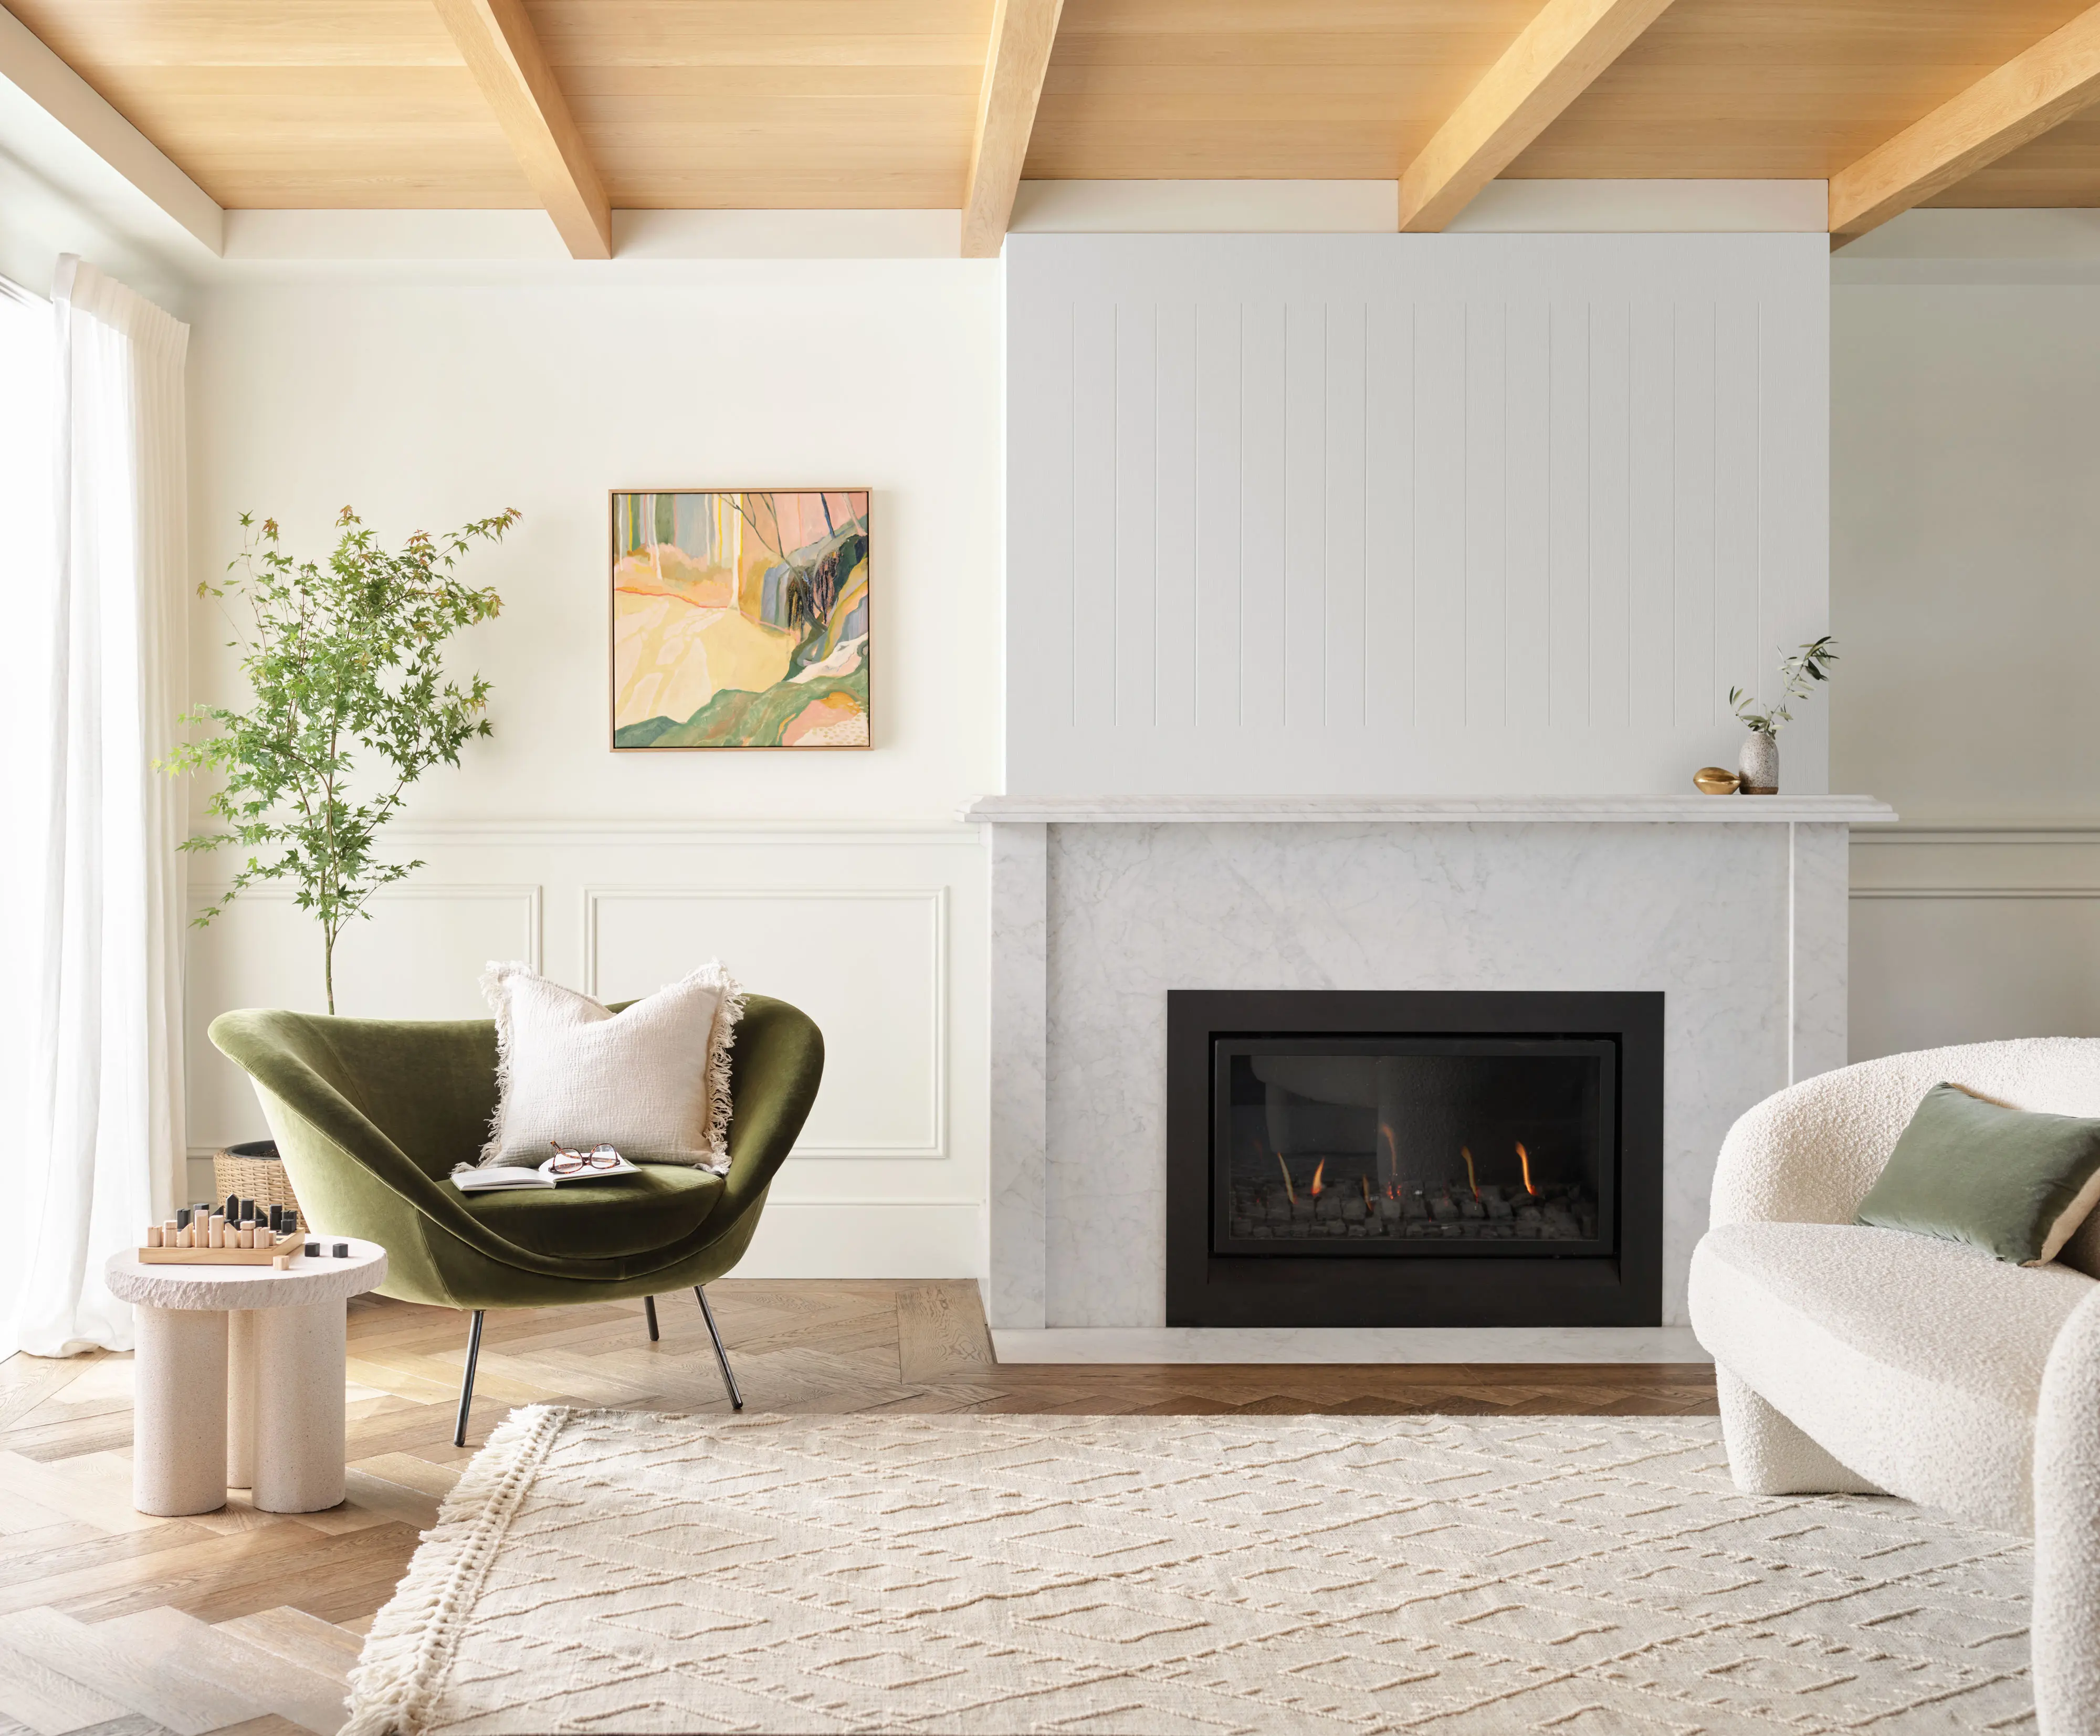 White living room with a a timber ceiling, green arm chair and fireplace